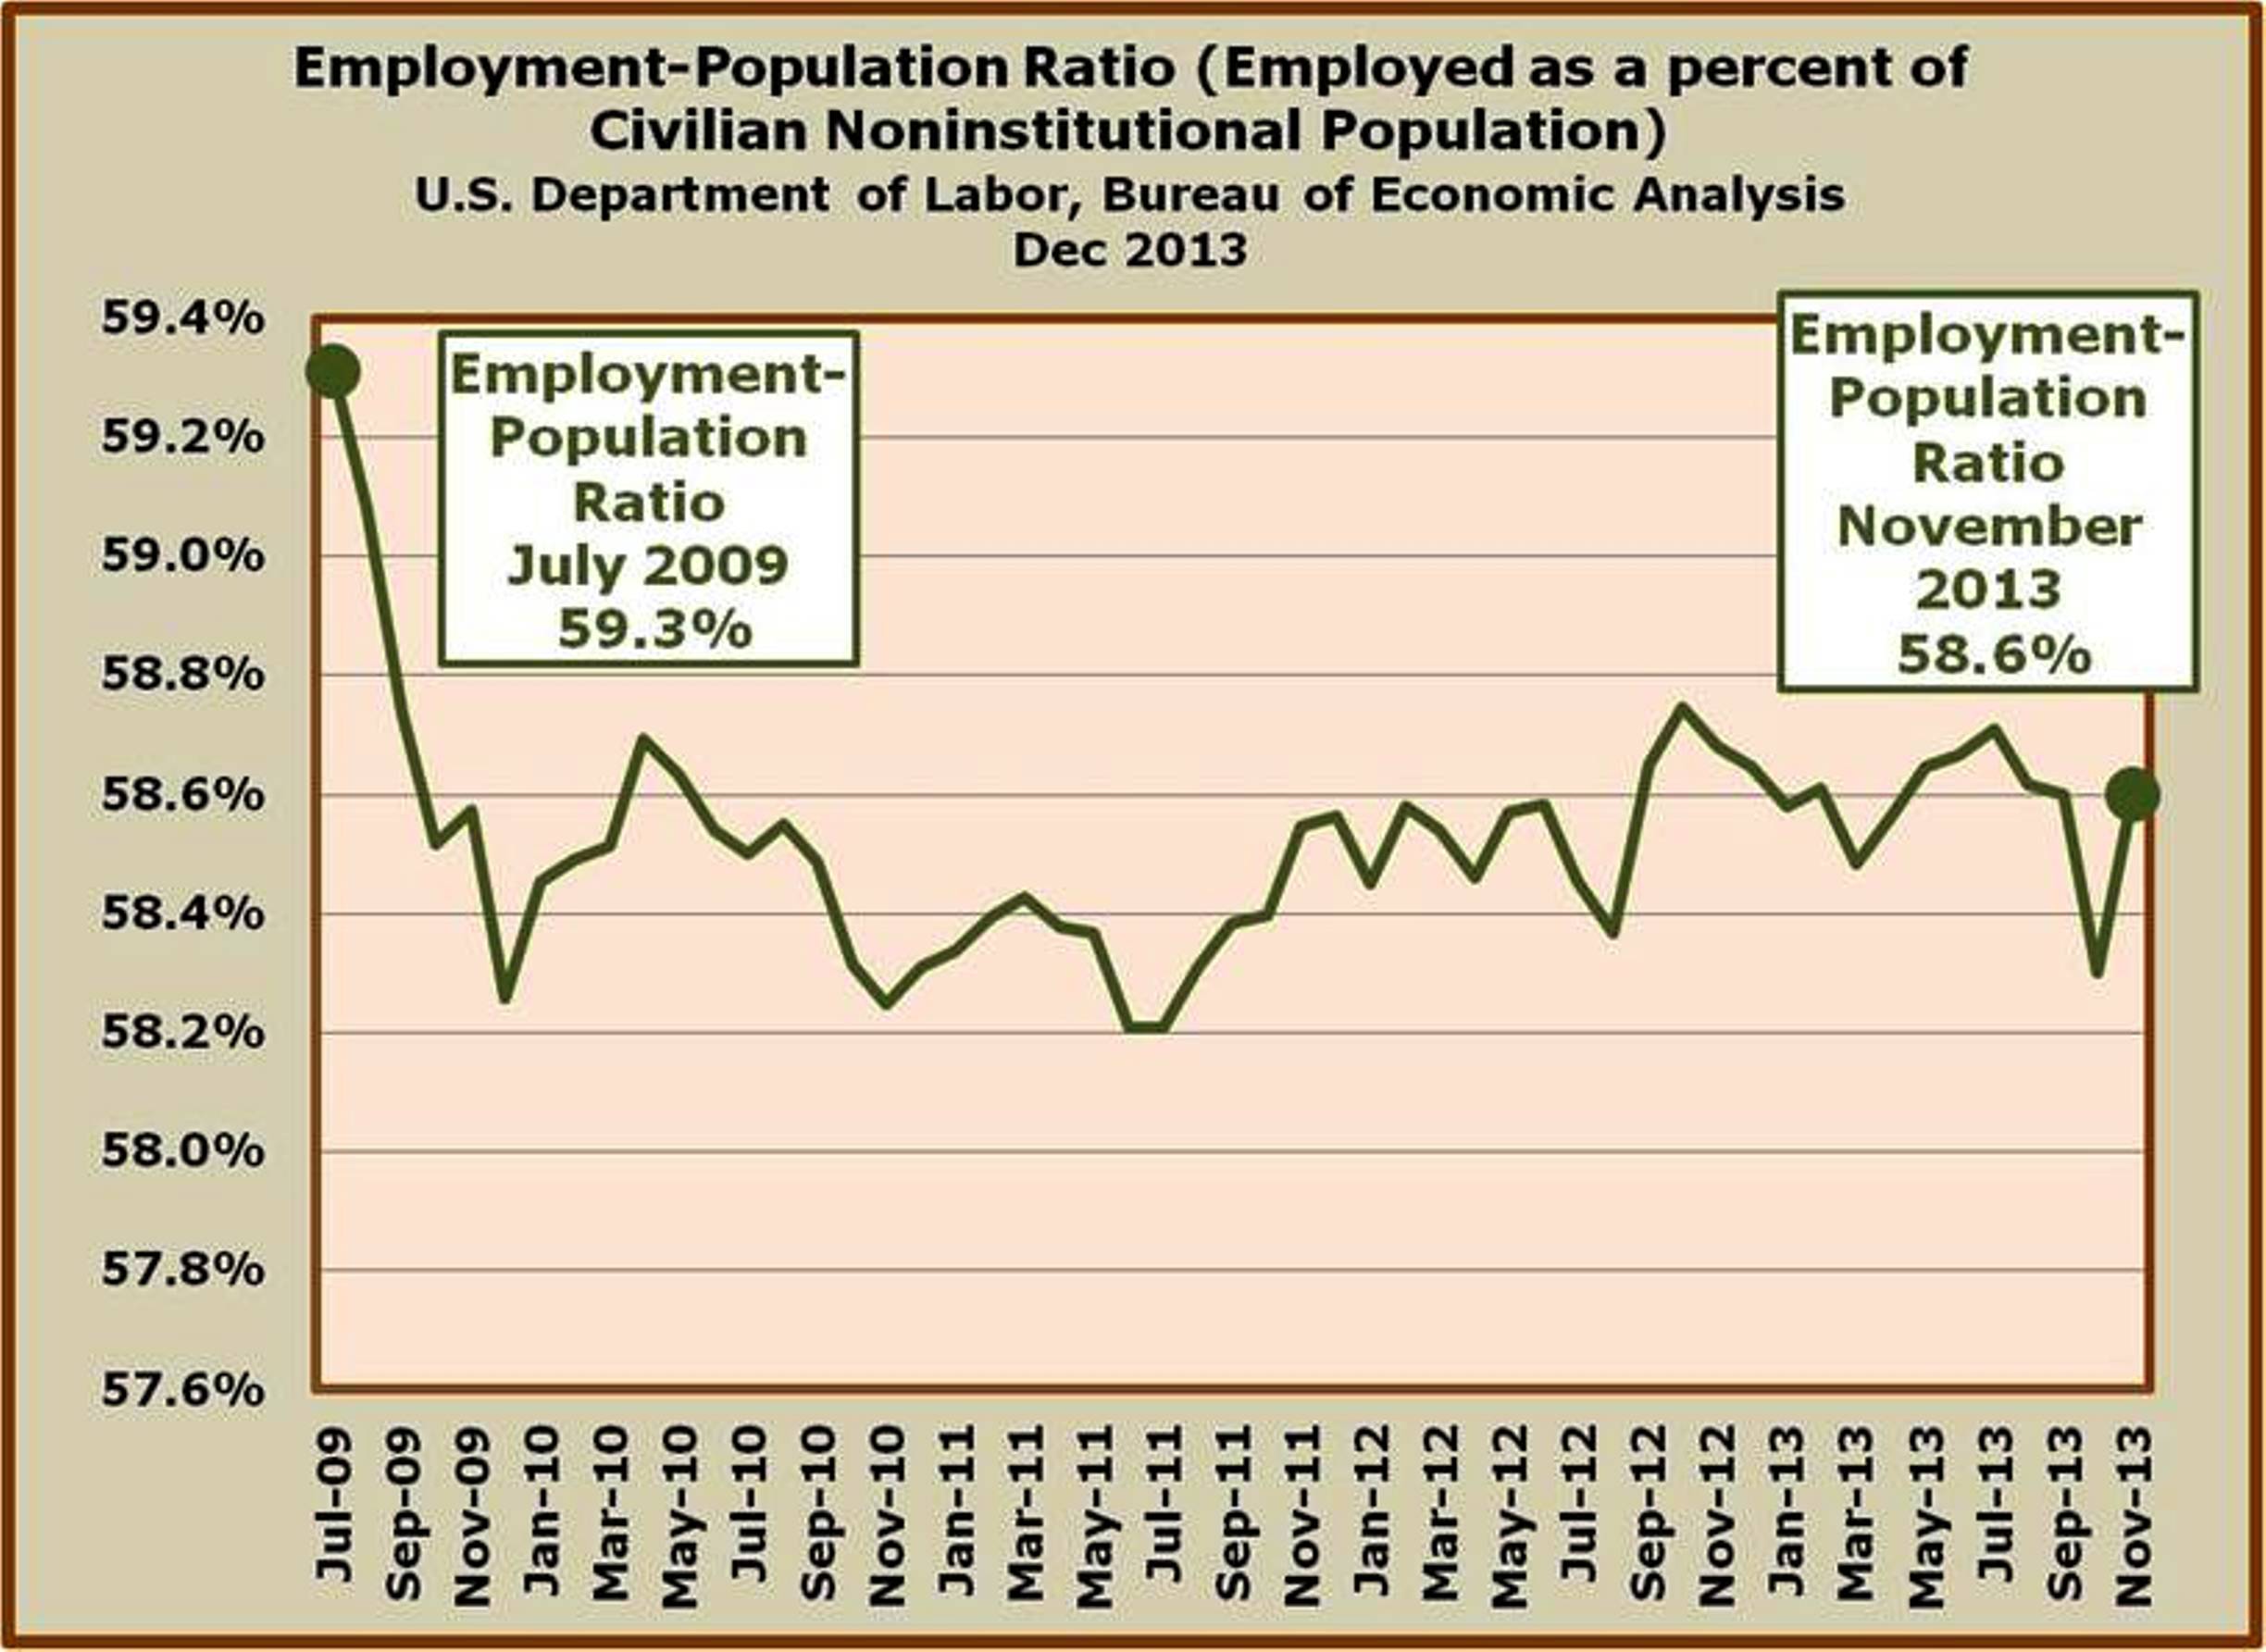 10-The Employment Population Ratio (employed as a percent of the Civilian Noninstitutional Population) is being closely monitored by the Fed - this is more important than Unemployment